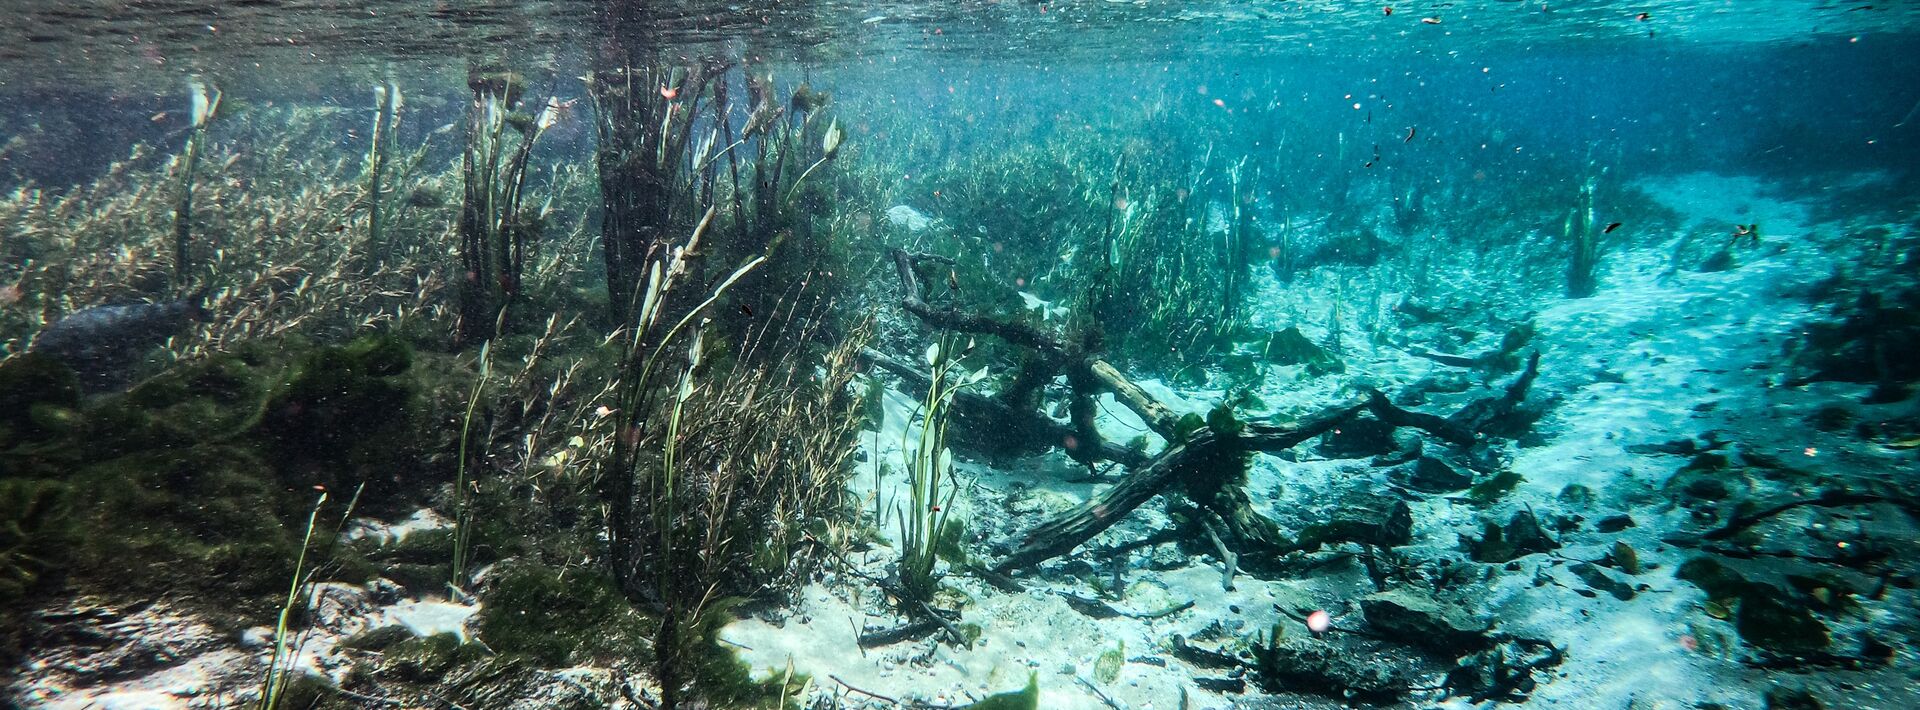 an underwater photo where you can see the blue water, green plants swaying, and white sand with rocks in it